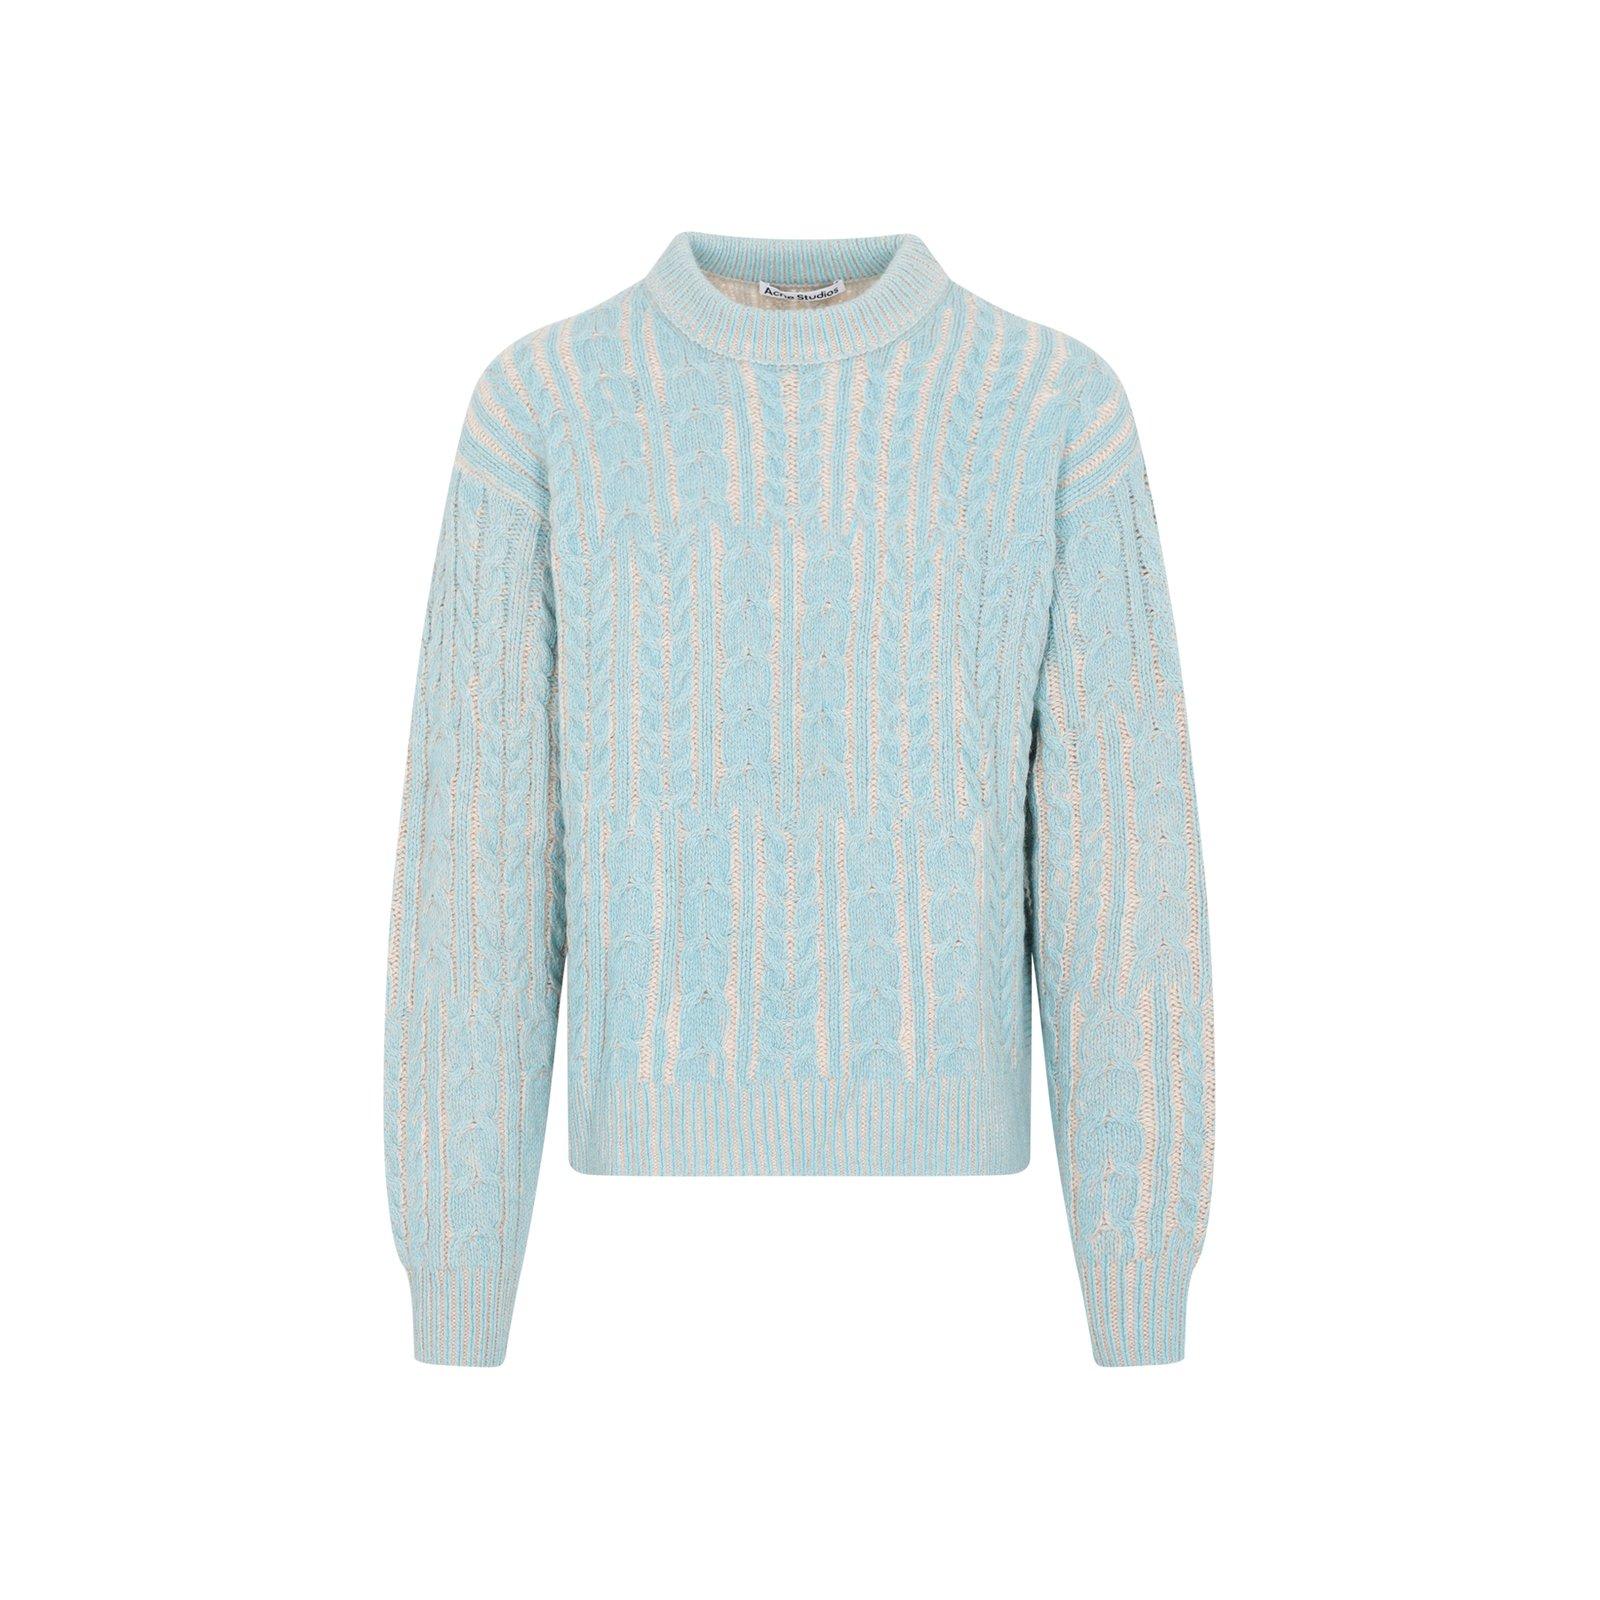 Acne Studios Crewneck Knitted Sweater